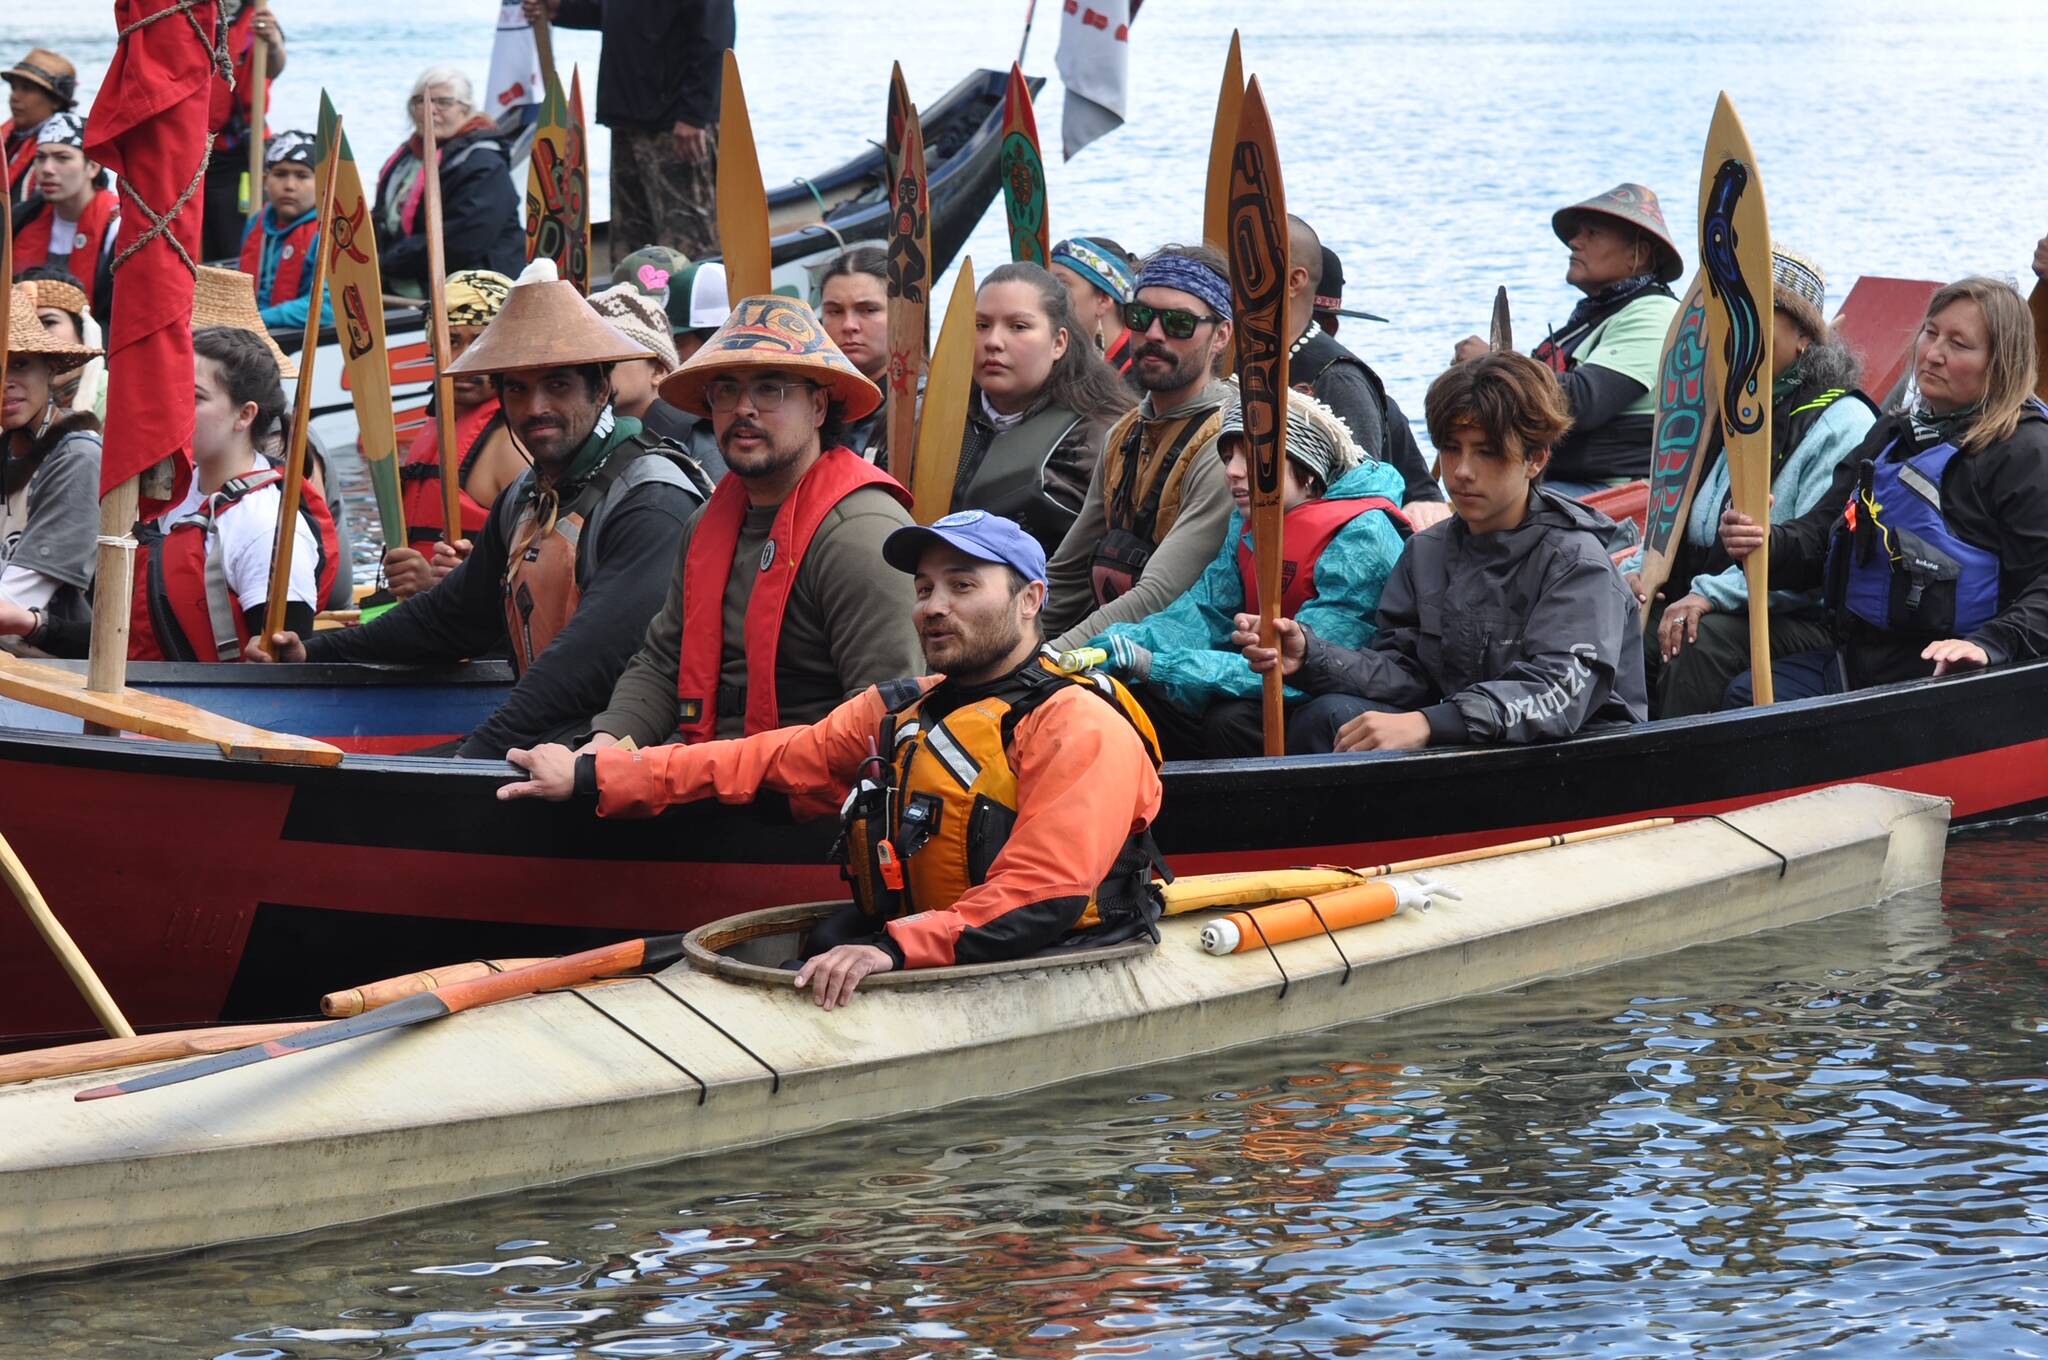 Paddlers in traditional Tlingit canoes, plus a smaller Bering Sea kayak guided by Lou Logan, arrive at the Auke Village Recreation Area at midday Tuesday following their journey down the northern part of the Inside Passage. (Laurie Craig / Juneau Empire)